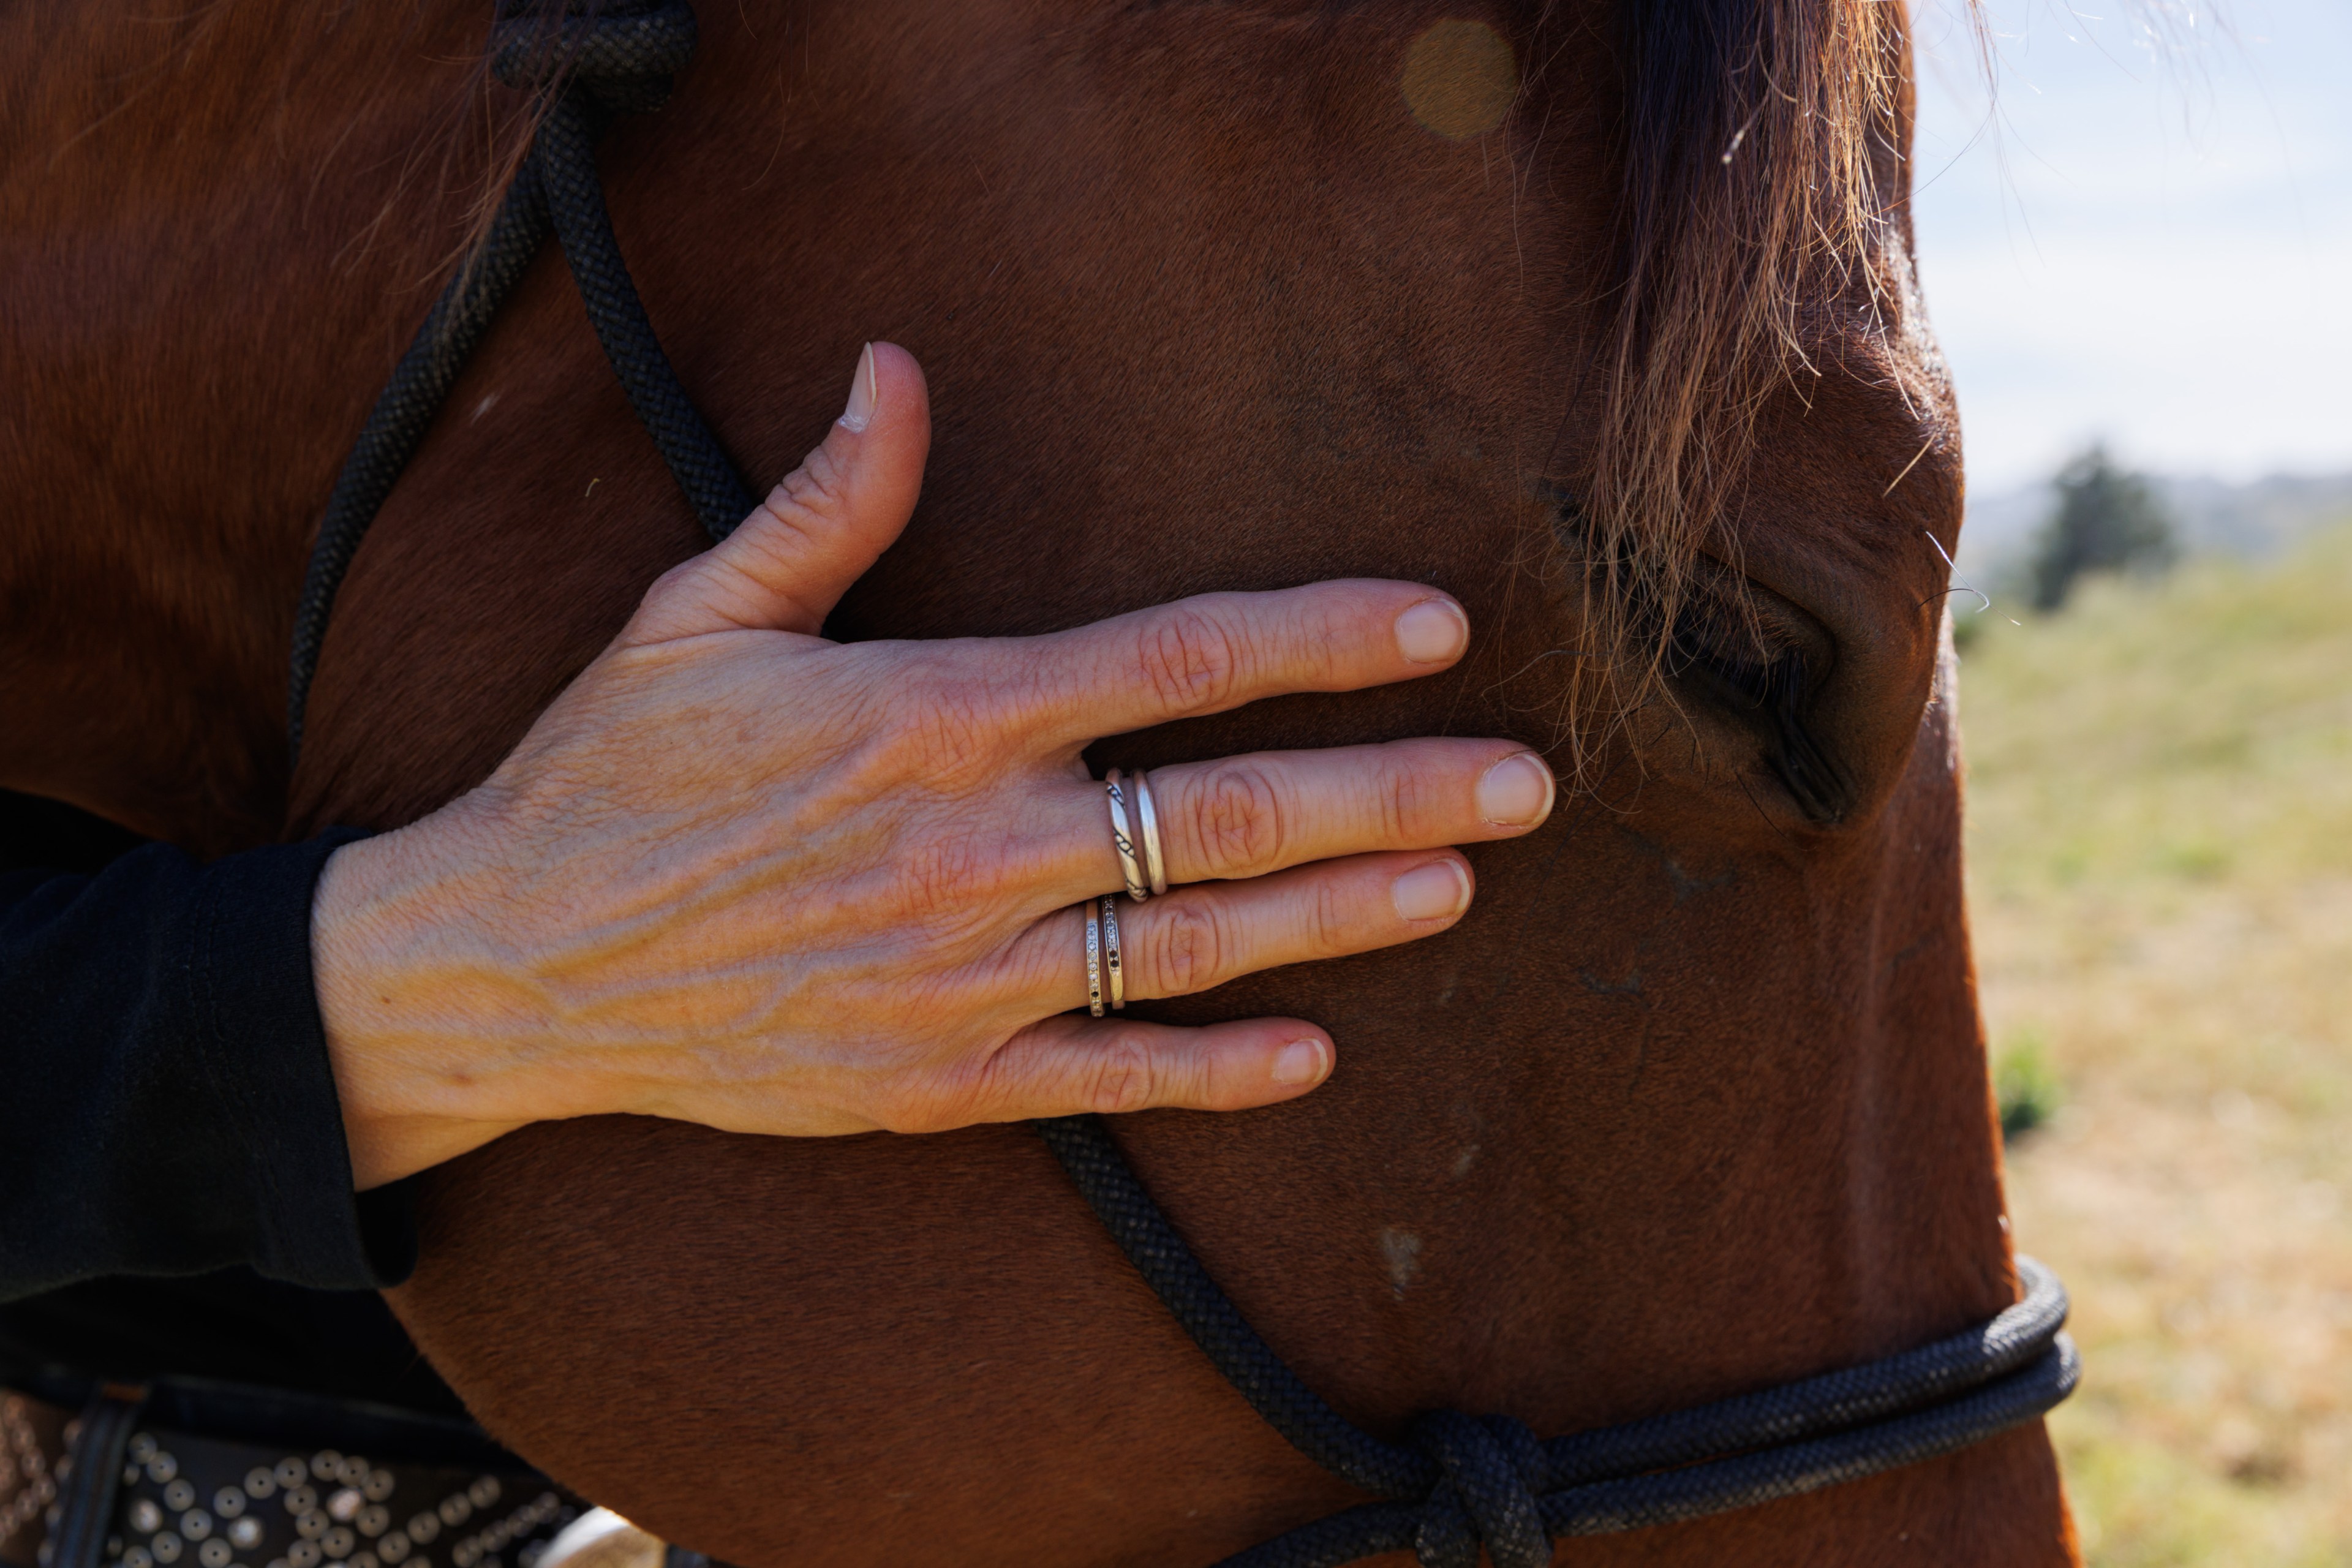 A person wearing silver rings rests their hand gently on the face of a brown horse, just below its eye, while holding a black rope halter.